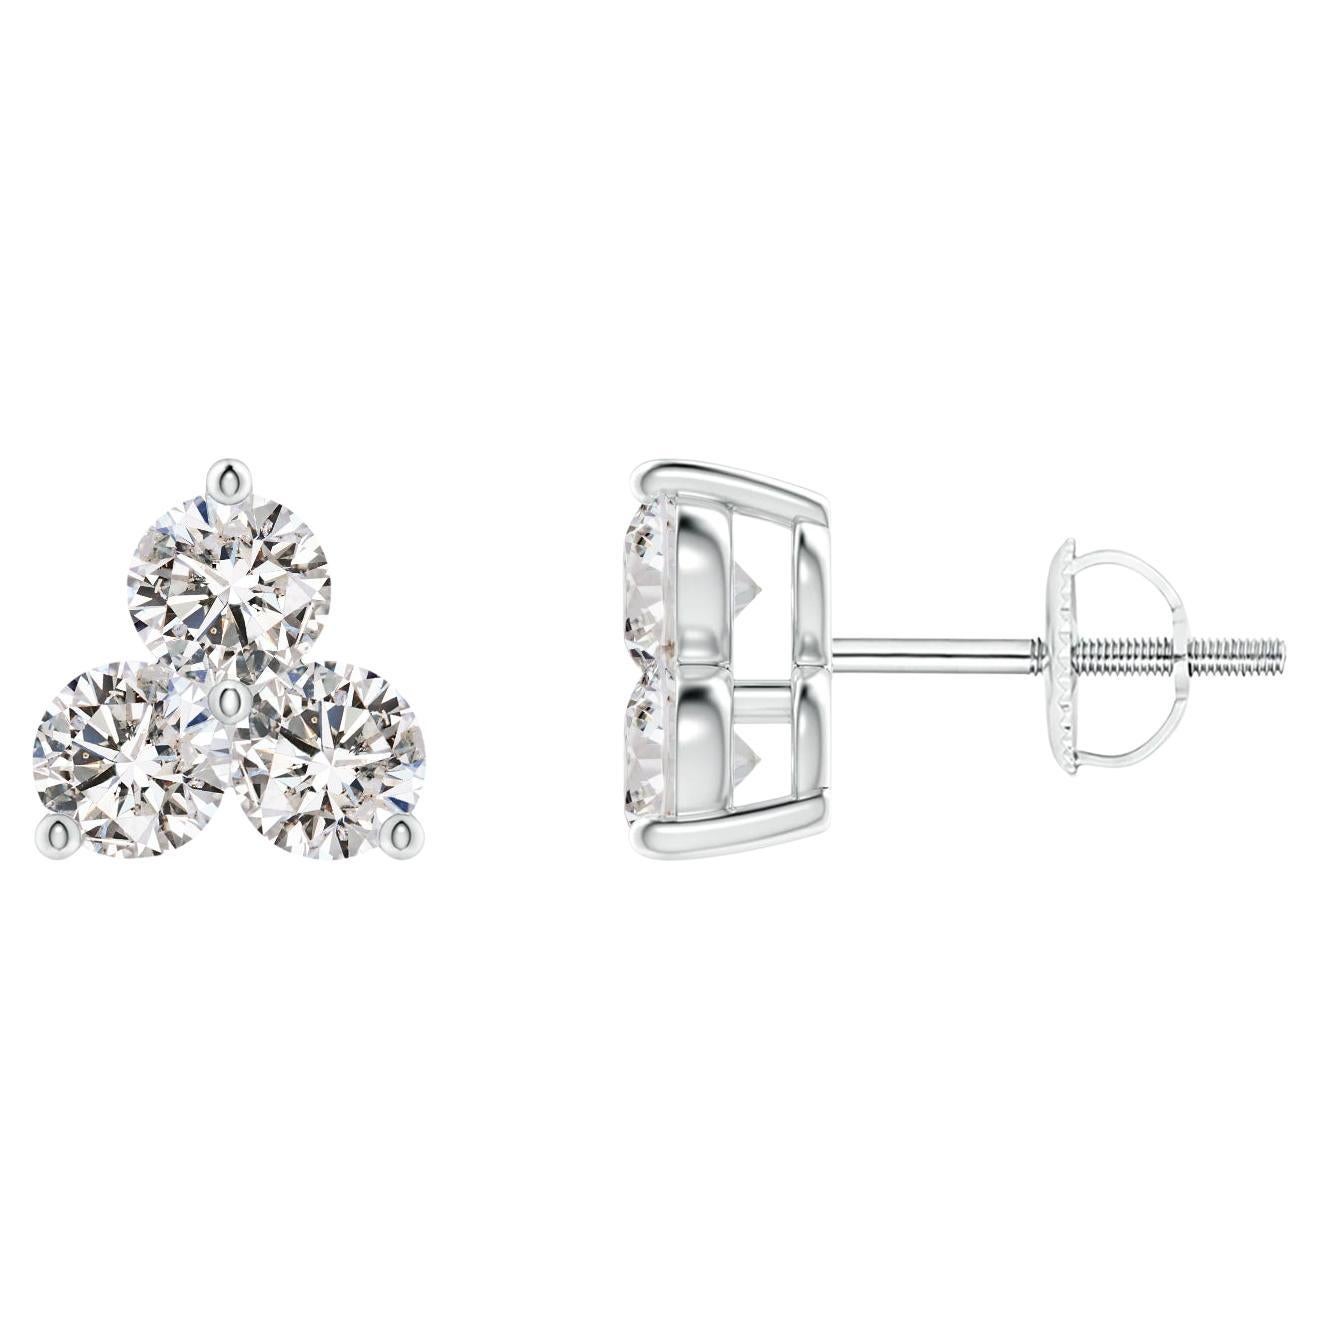 Natural Diamond Stud Earrings in 14K White Gold (0.5cttw Color-I-J Clarity-I1I2) For Sale